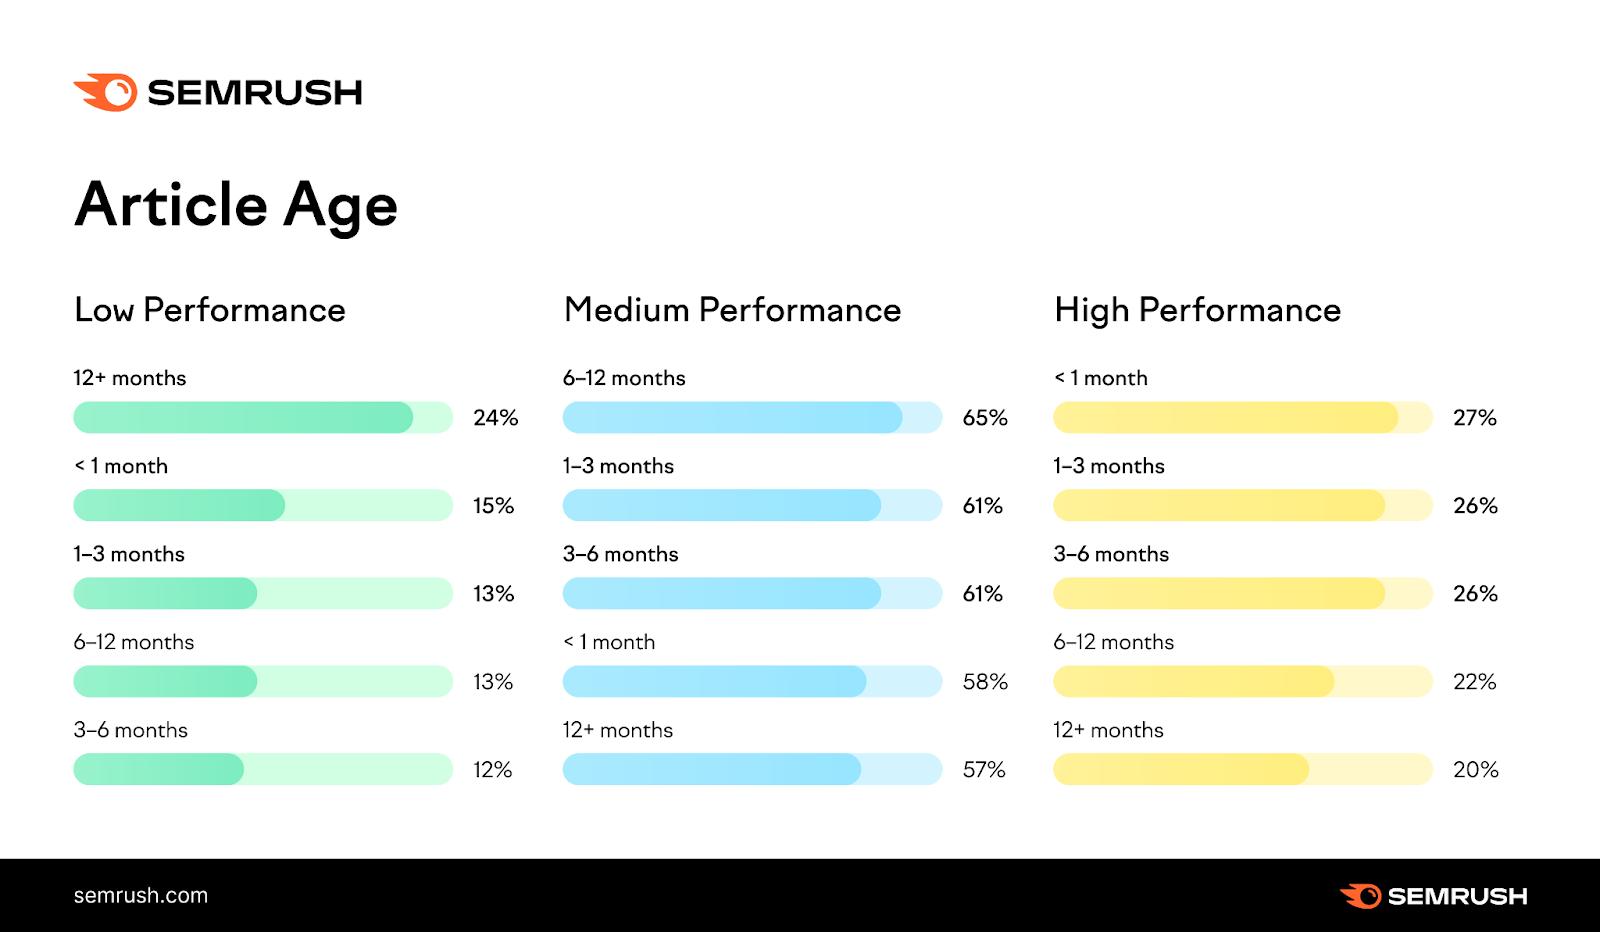 Article age and their organic performance